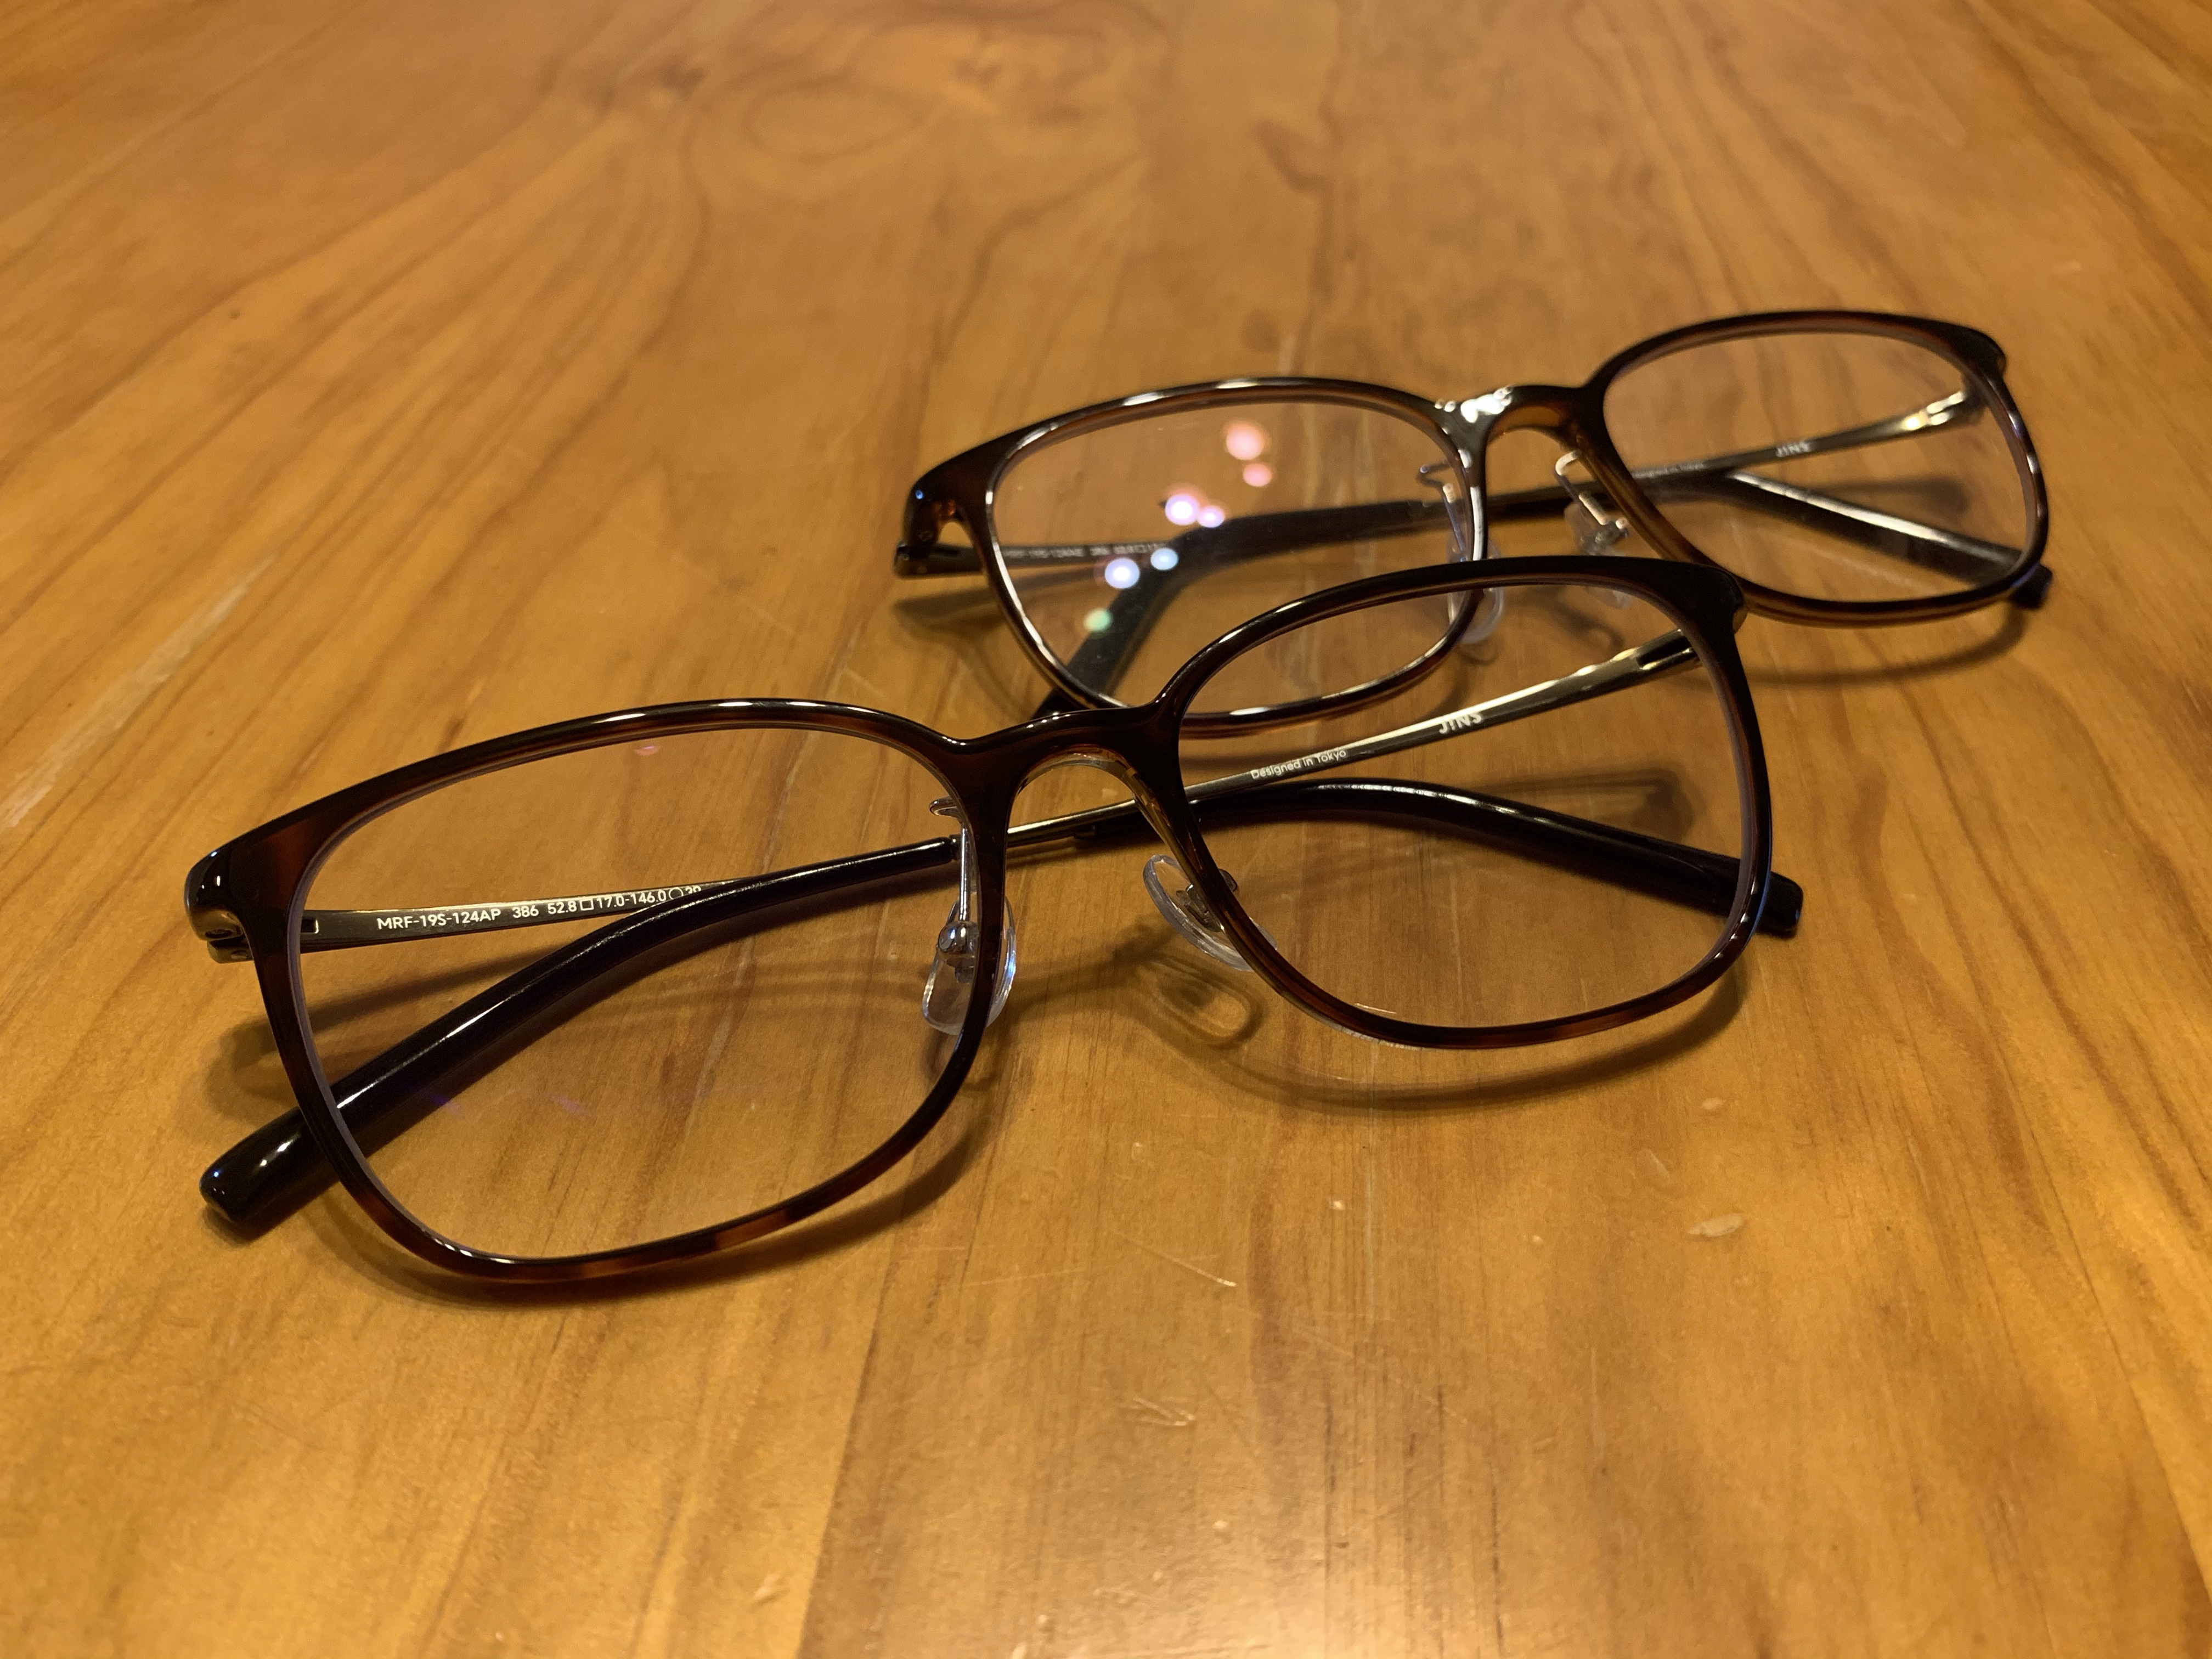 Two pairs of identical glasses